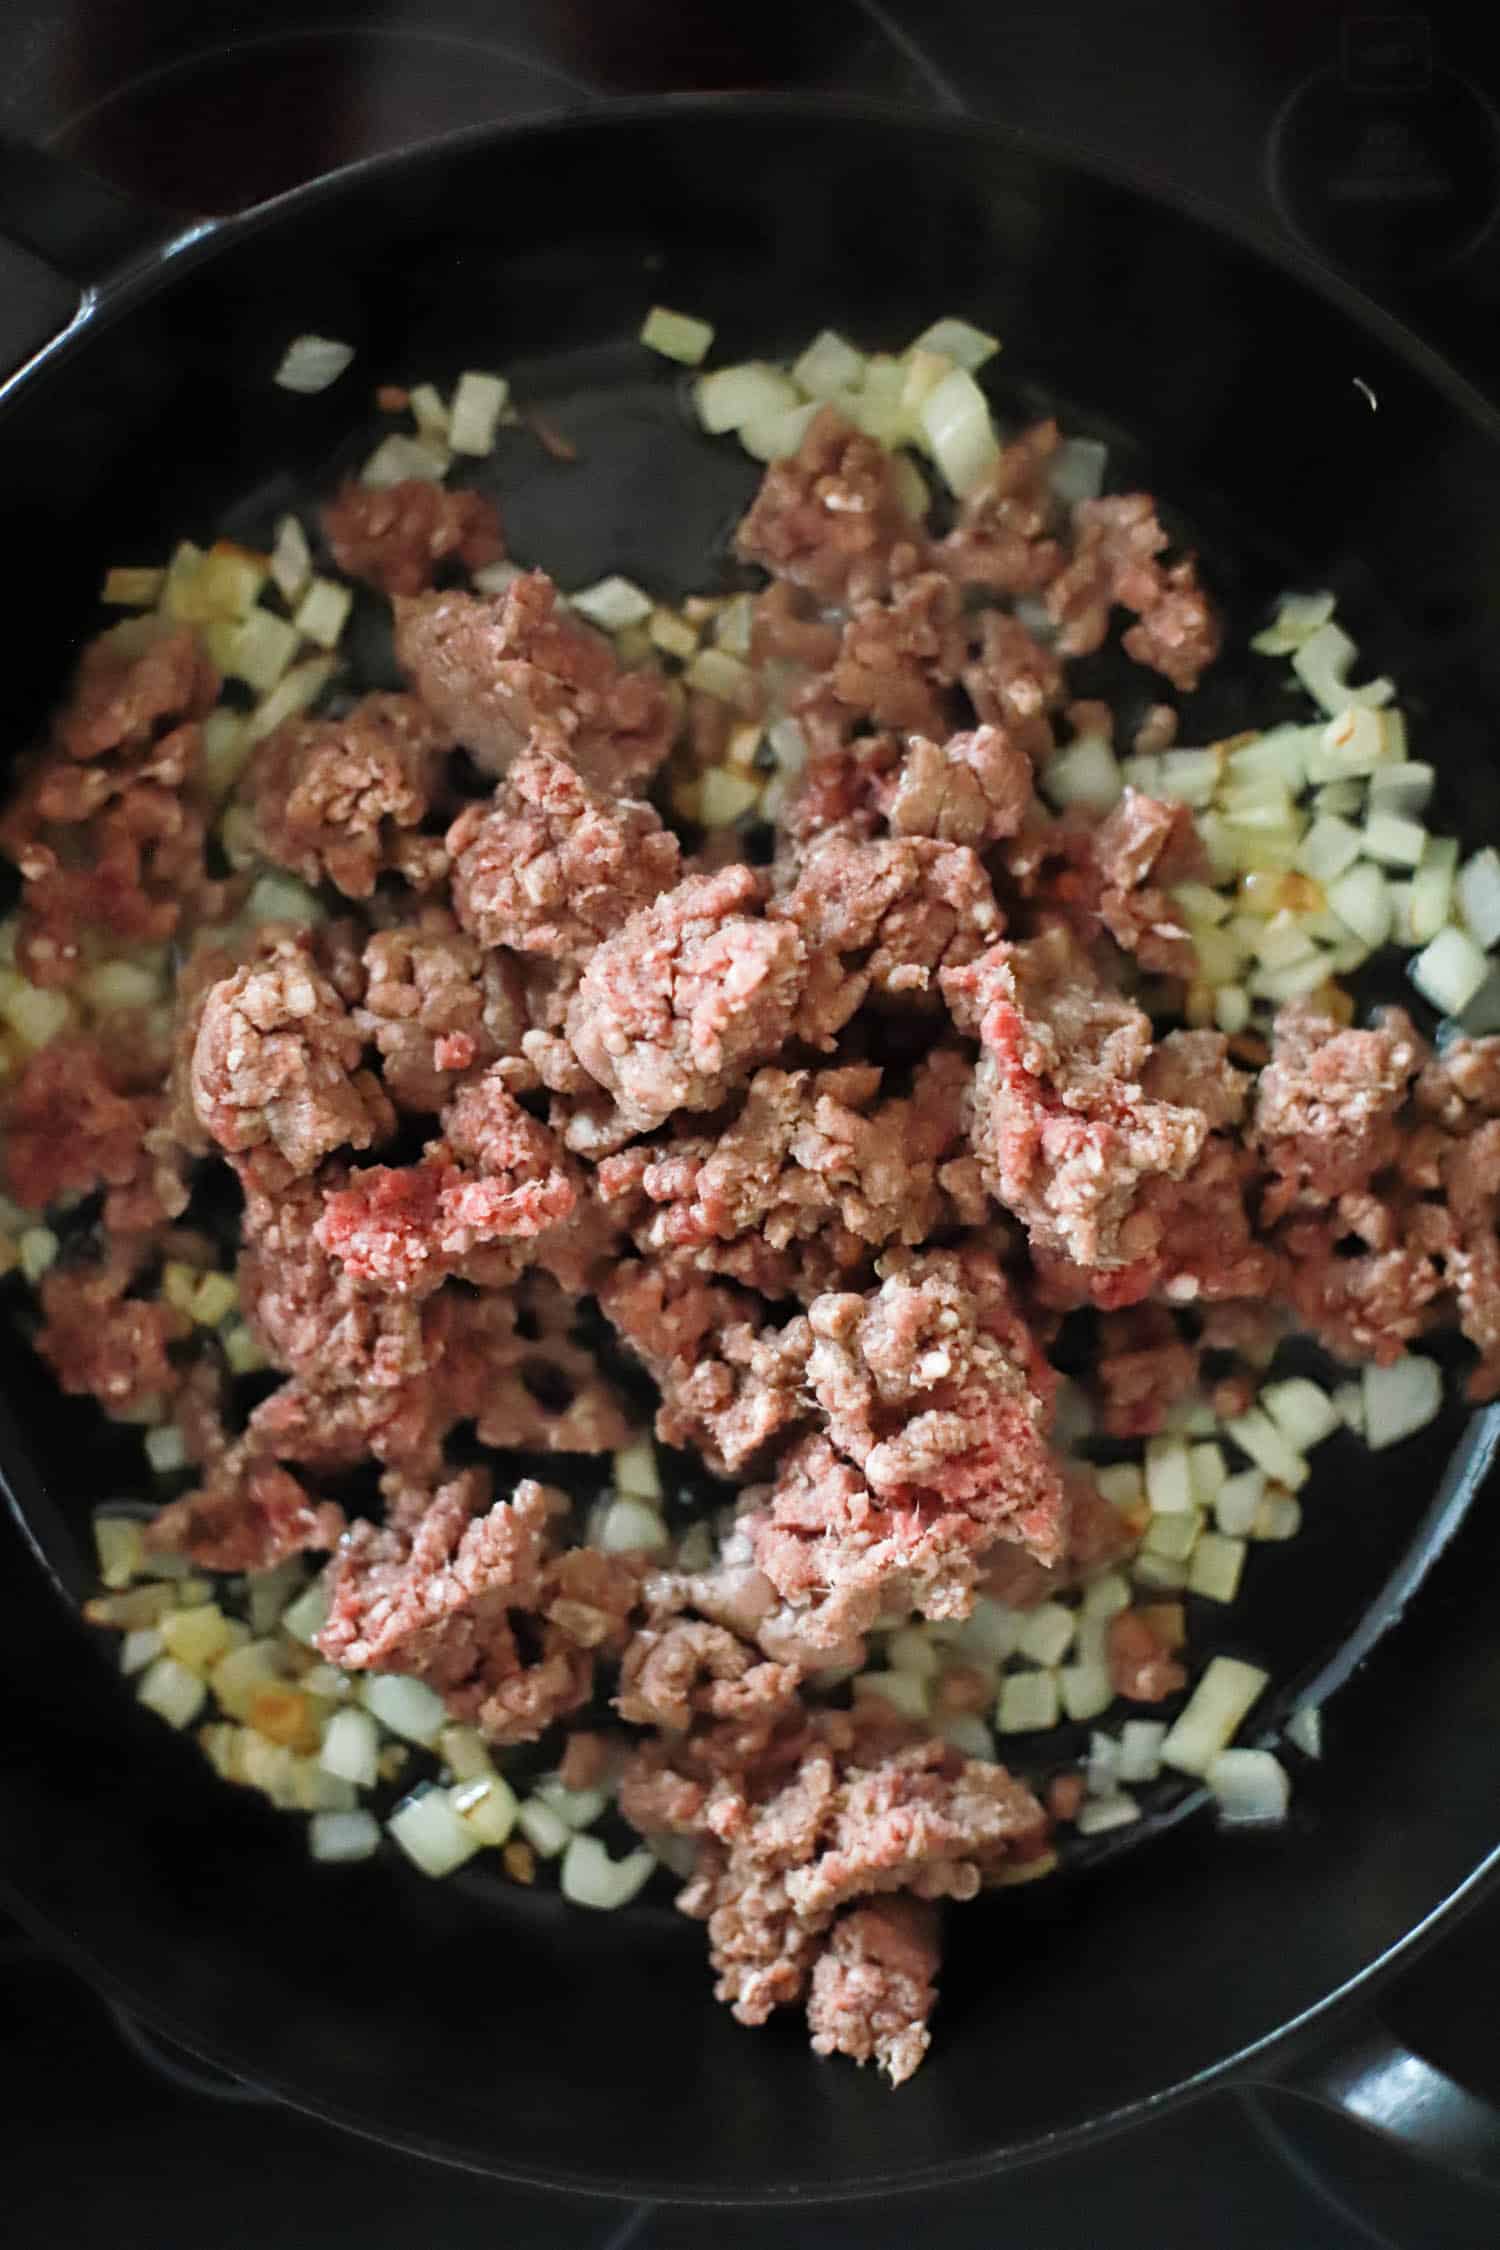 Ground beef crumbled in a skillet.